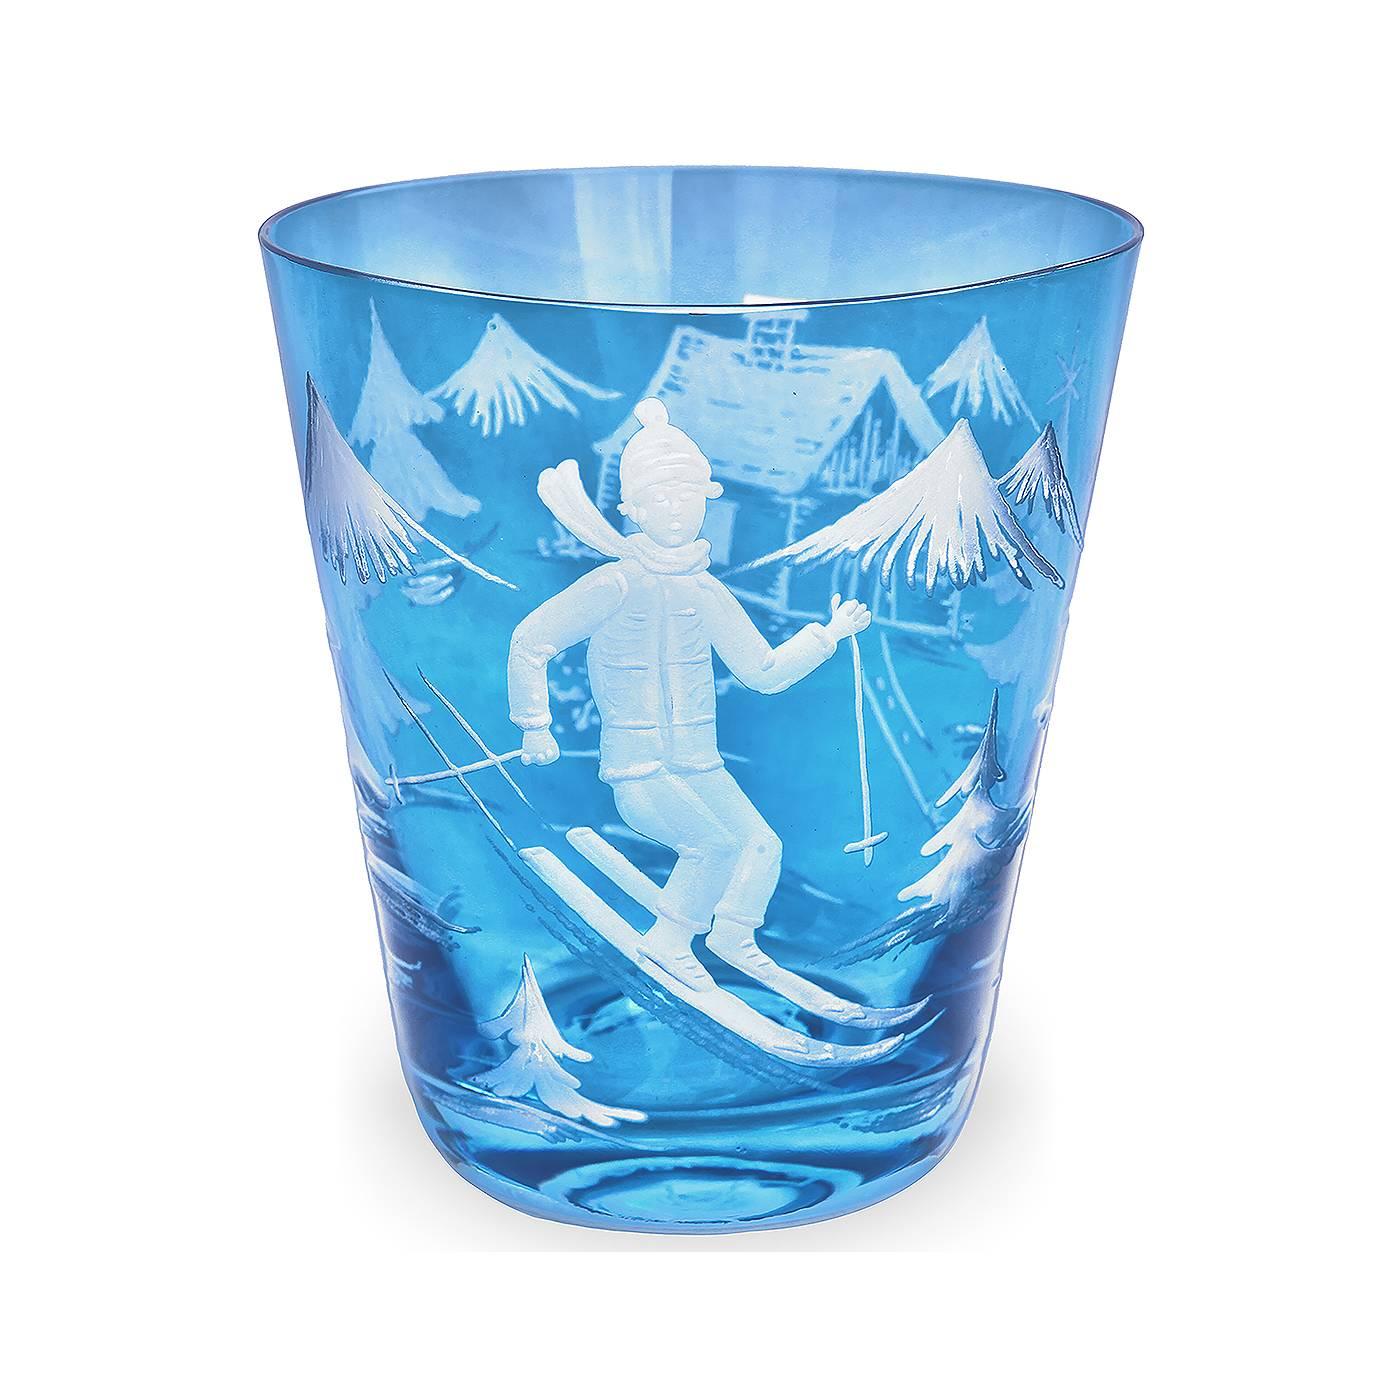 Handblown charming tumbler in blue crystal with a hands-free engraved decor. All around engraved with a coutry style decor with trees, a house and skier. A matching votiv and a carafe comes in the same decor. Signed Sofina in the bottom. Colored